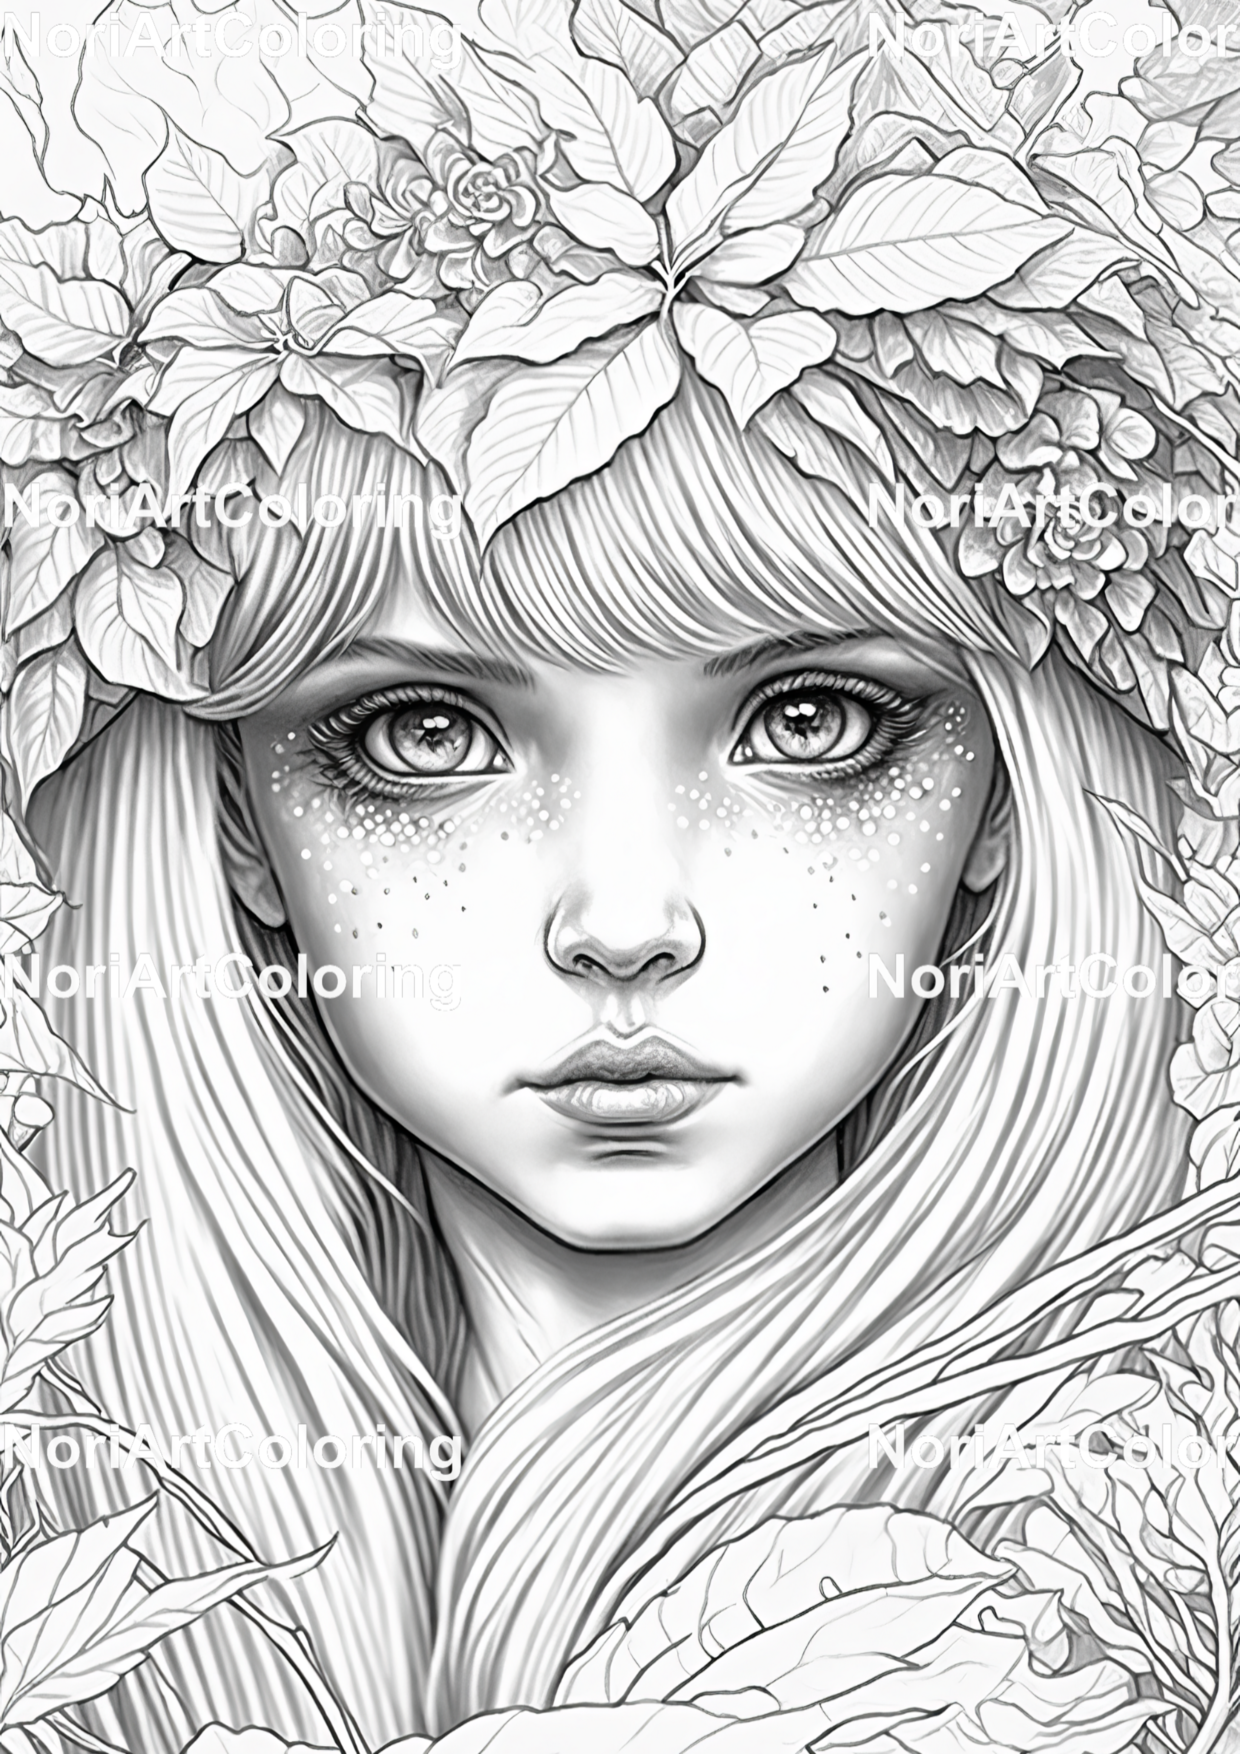 Black Women Coloring Book Grayscale Coloring Pages for Adult